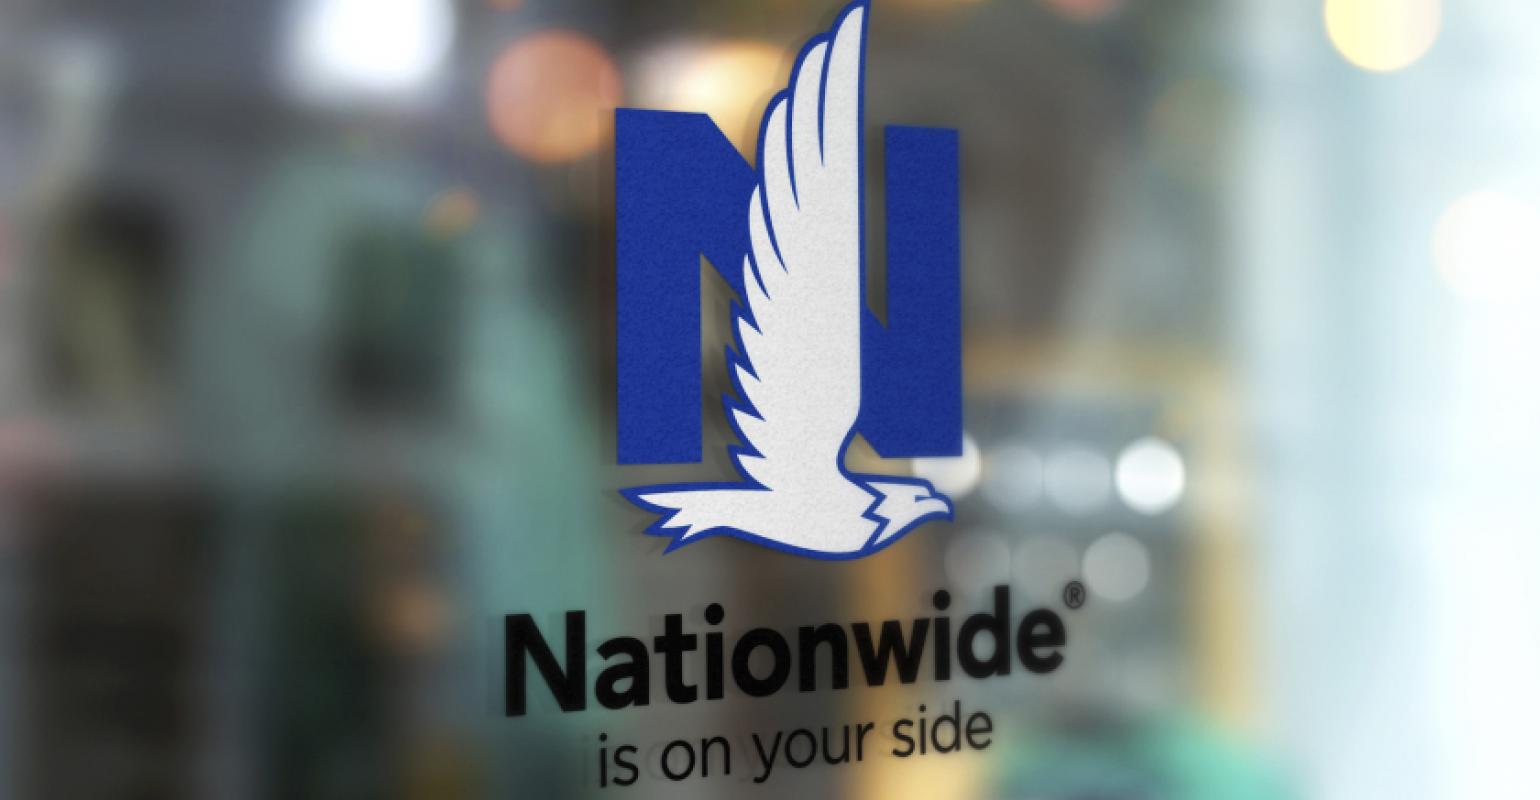 nationwide on your side